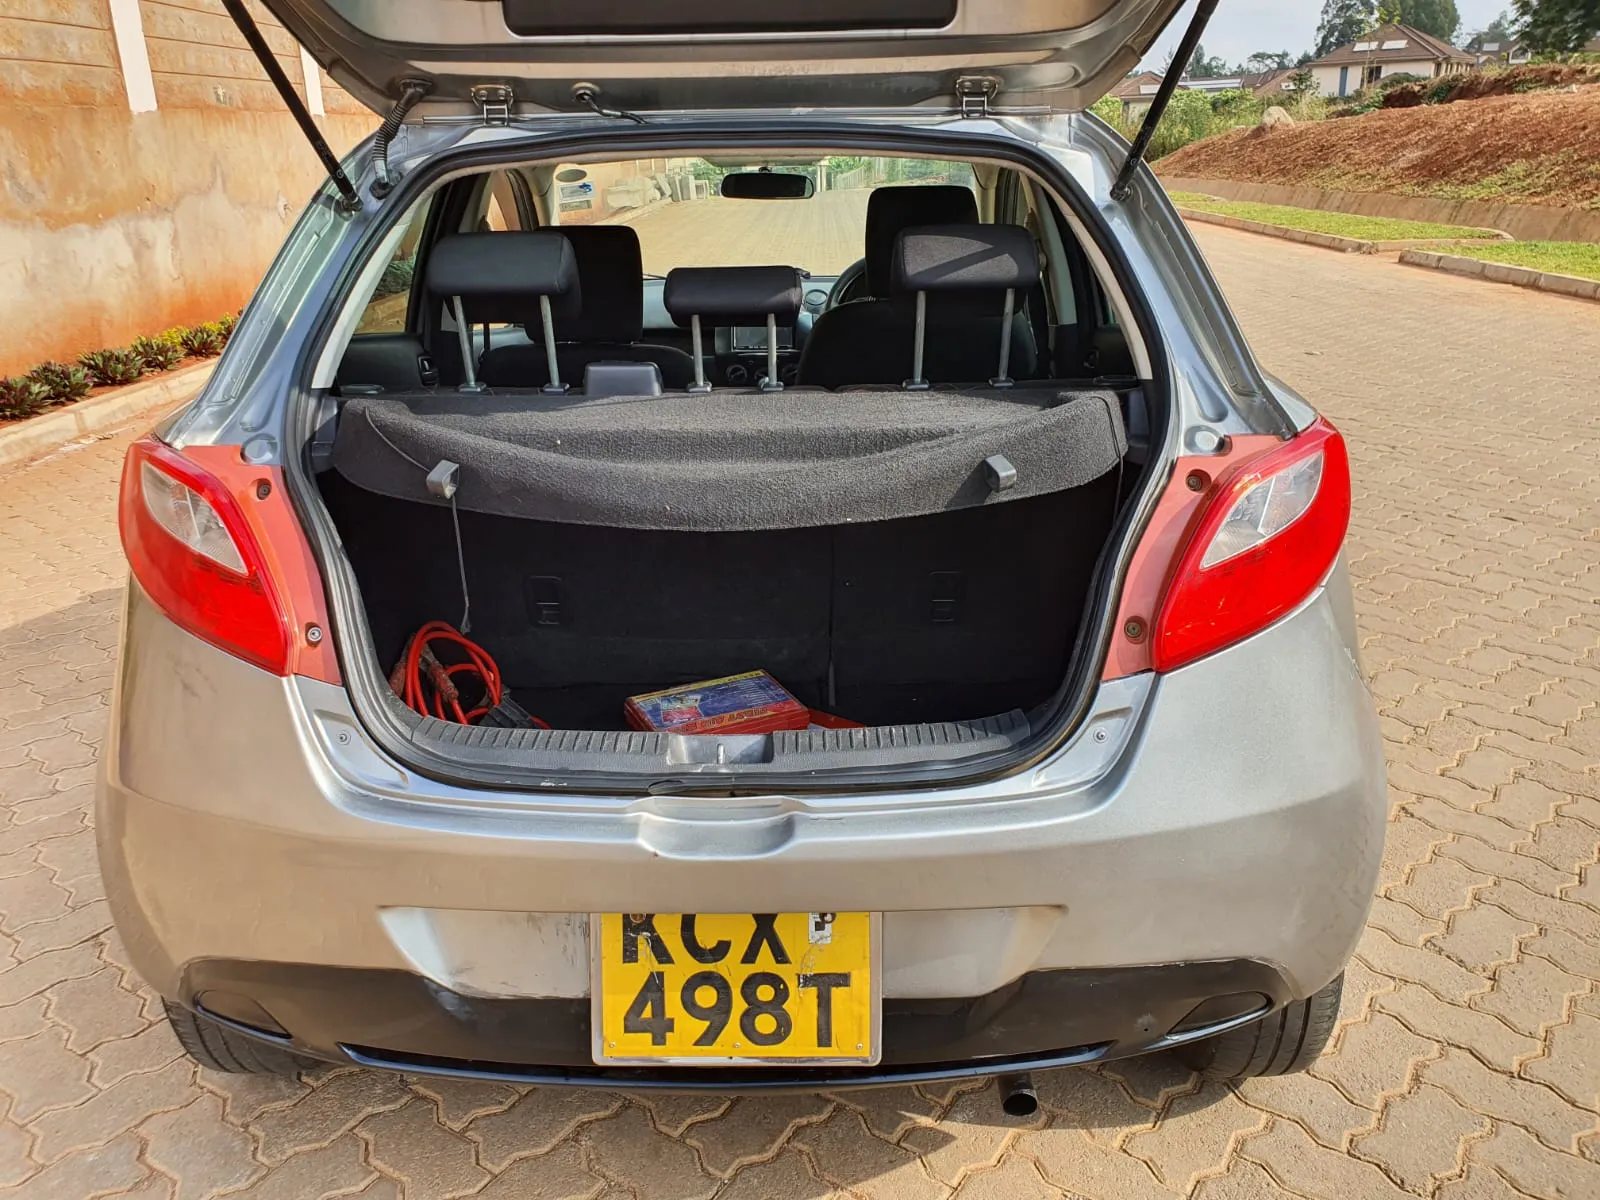 Mazda Demio kenya QUICK SALE You Pay 30% DEPOSIT demio for sale in kenya hire purchase installments TRADE IN OK EXCLUSIVE